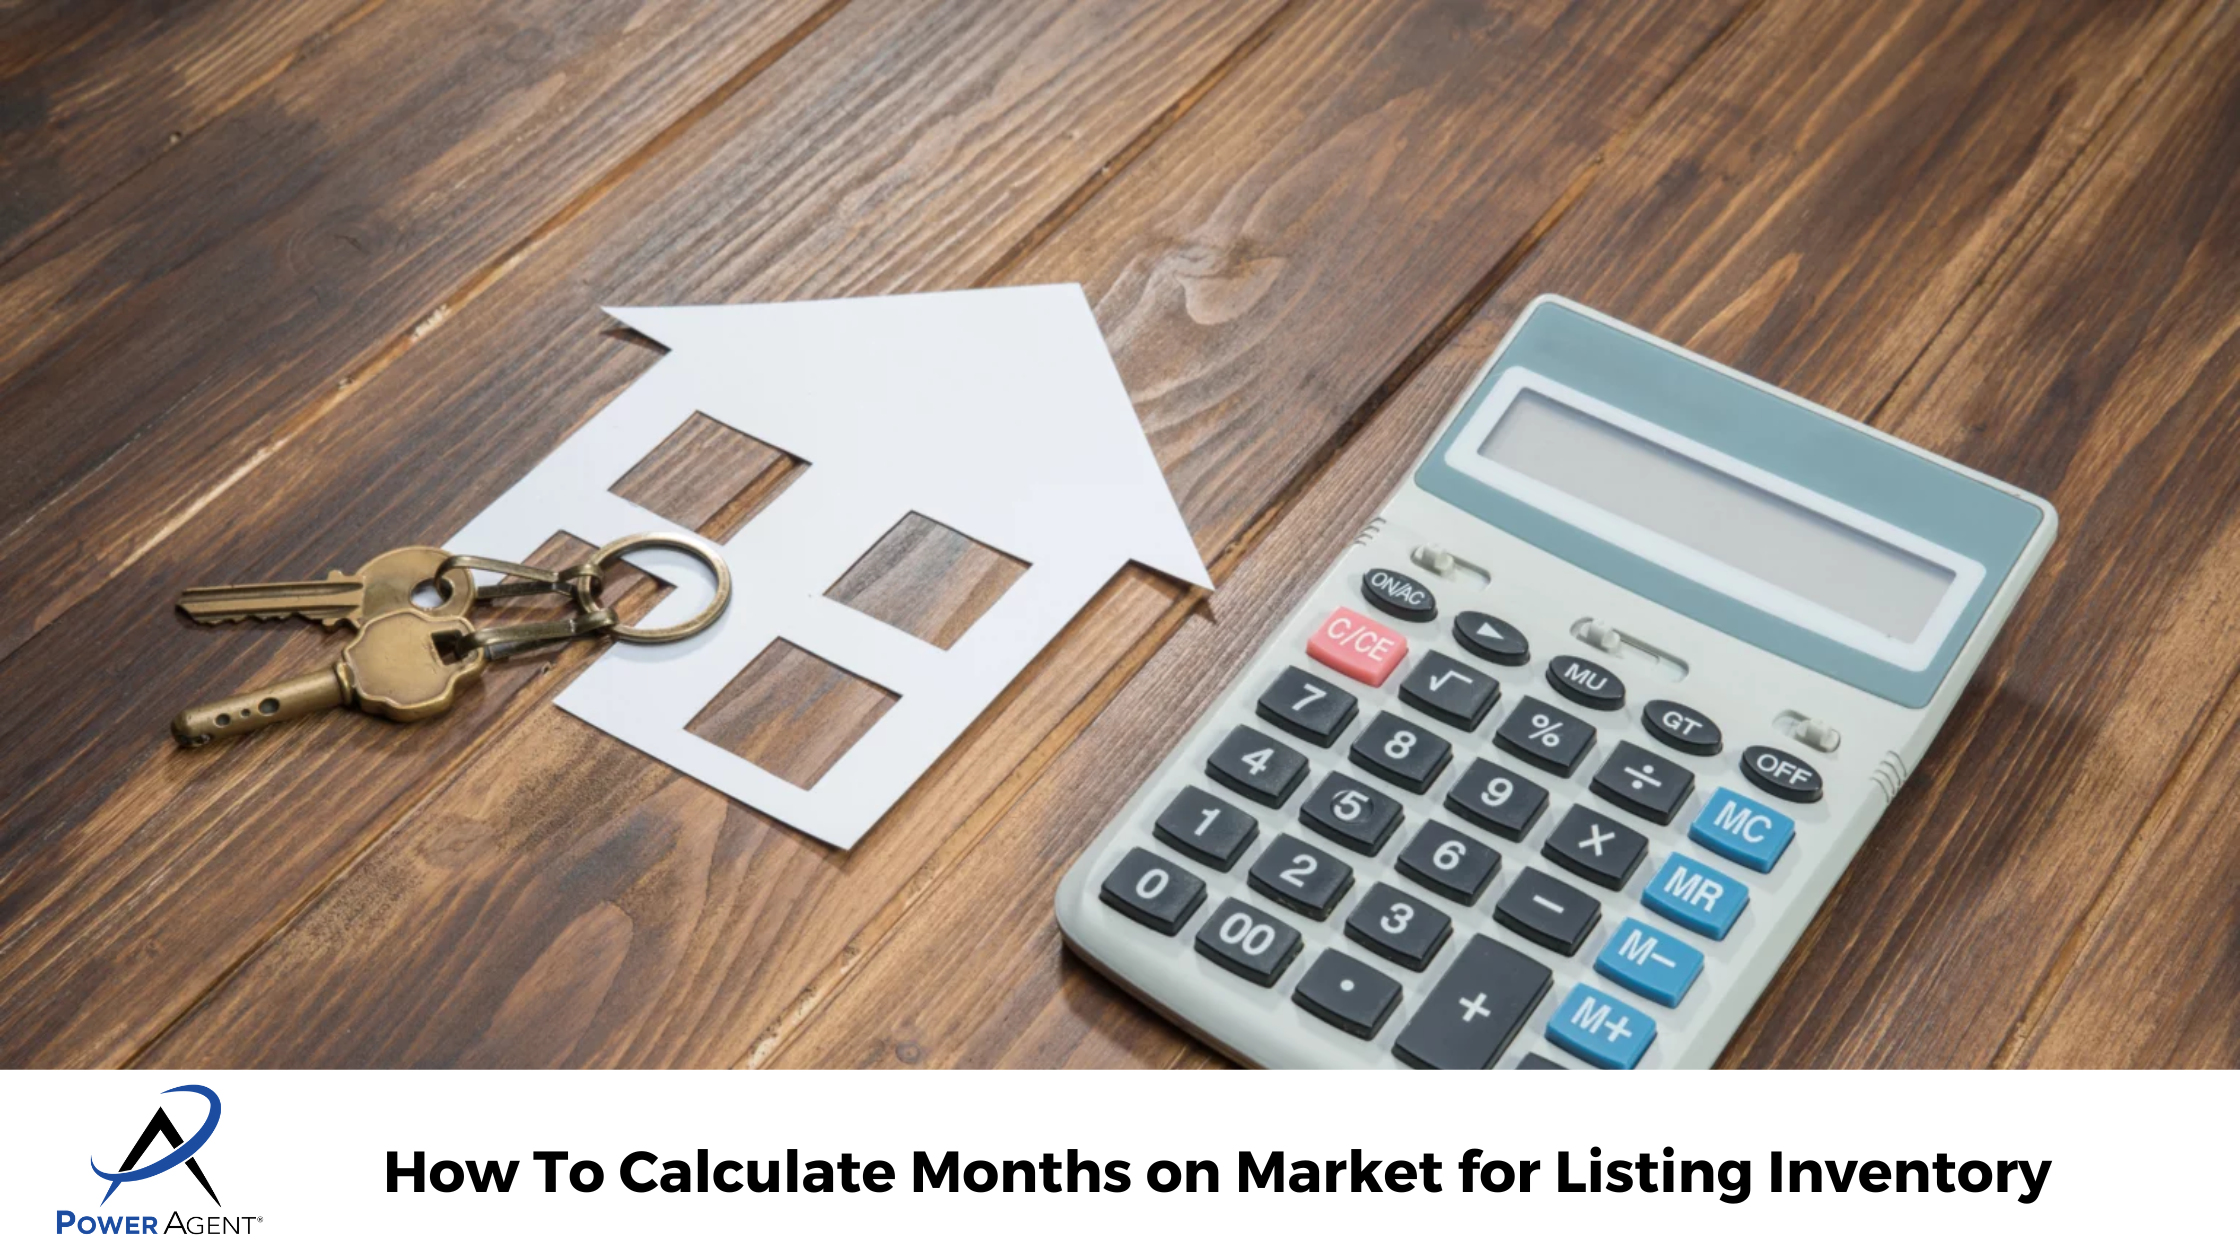 How To Calculate Months on Market for Listing Inventory